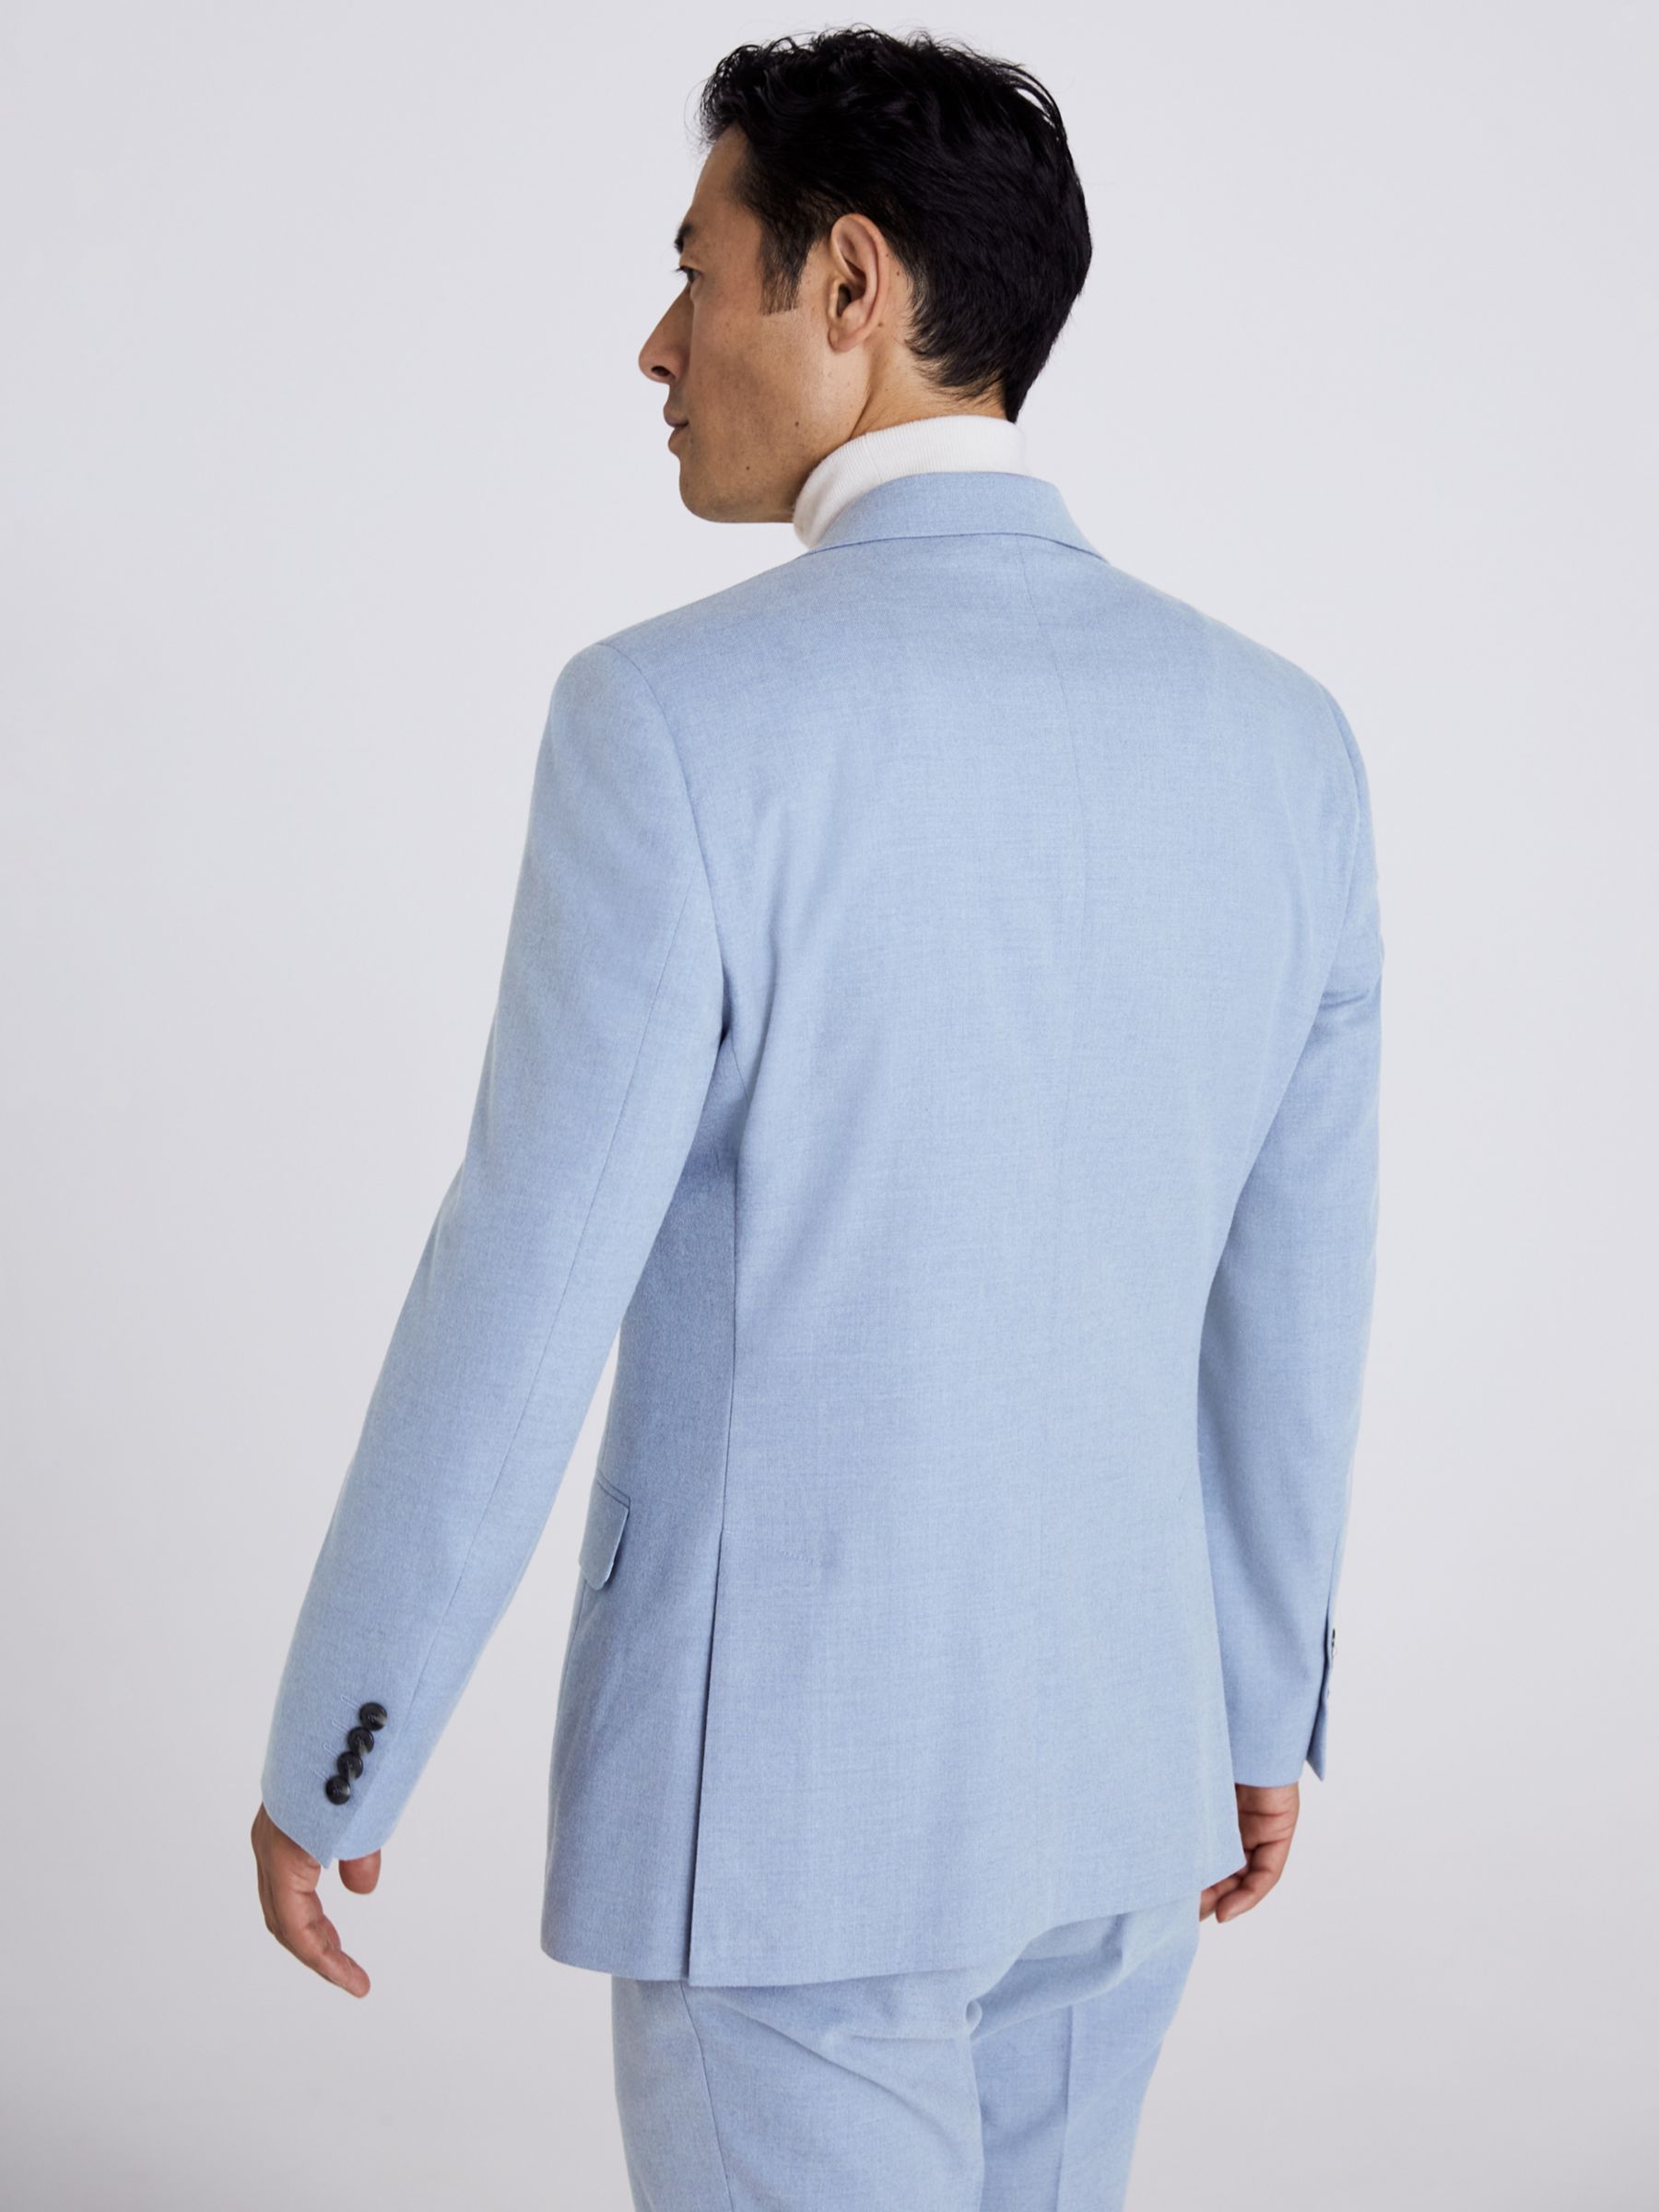 Moss Tailored Fit Flannel Suit Jacket, Light Blue at John Lewis & Partners